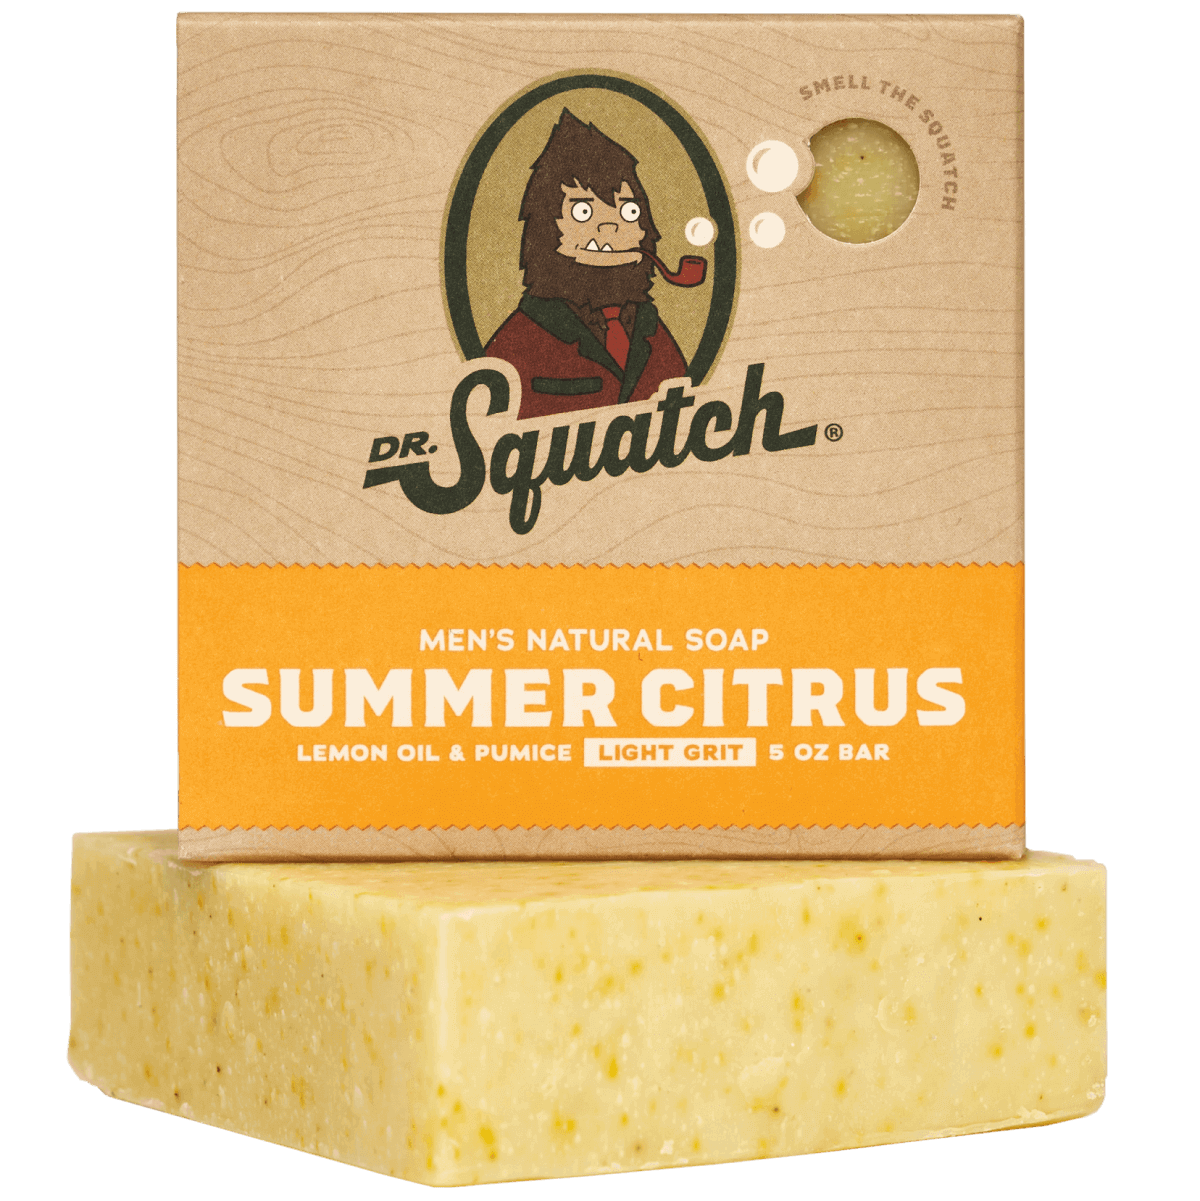 Dr. Squatch Review: Ranking The Best Dr. Squatch All-Natural Soap